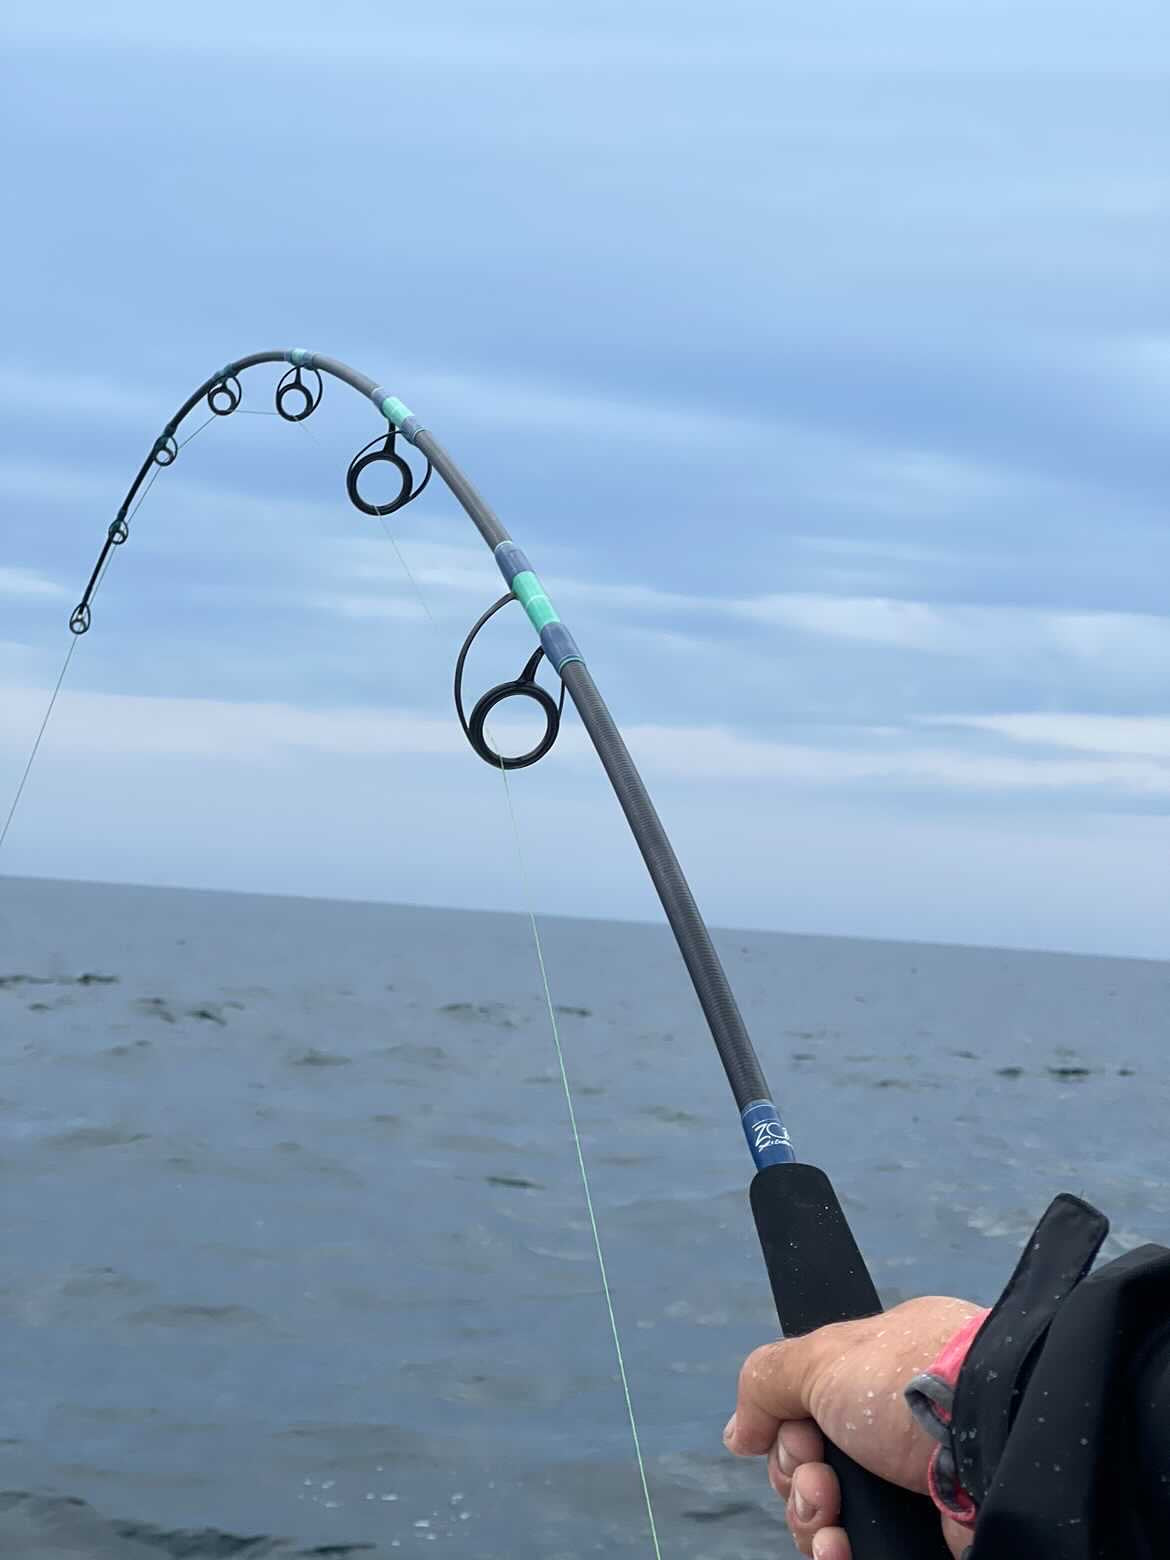 Favorite spinning popping rod for tuna?